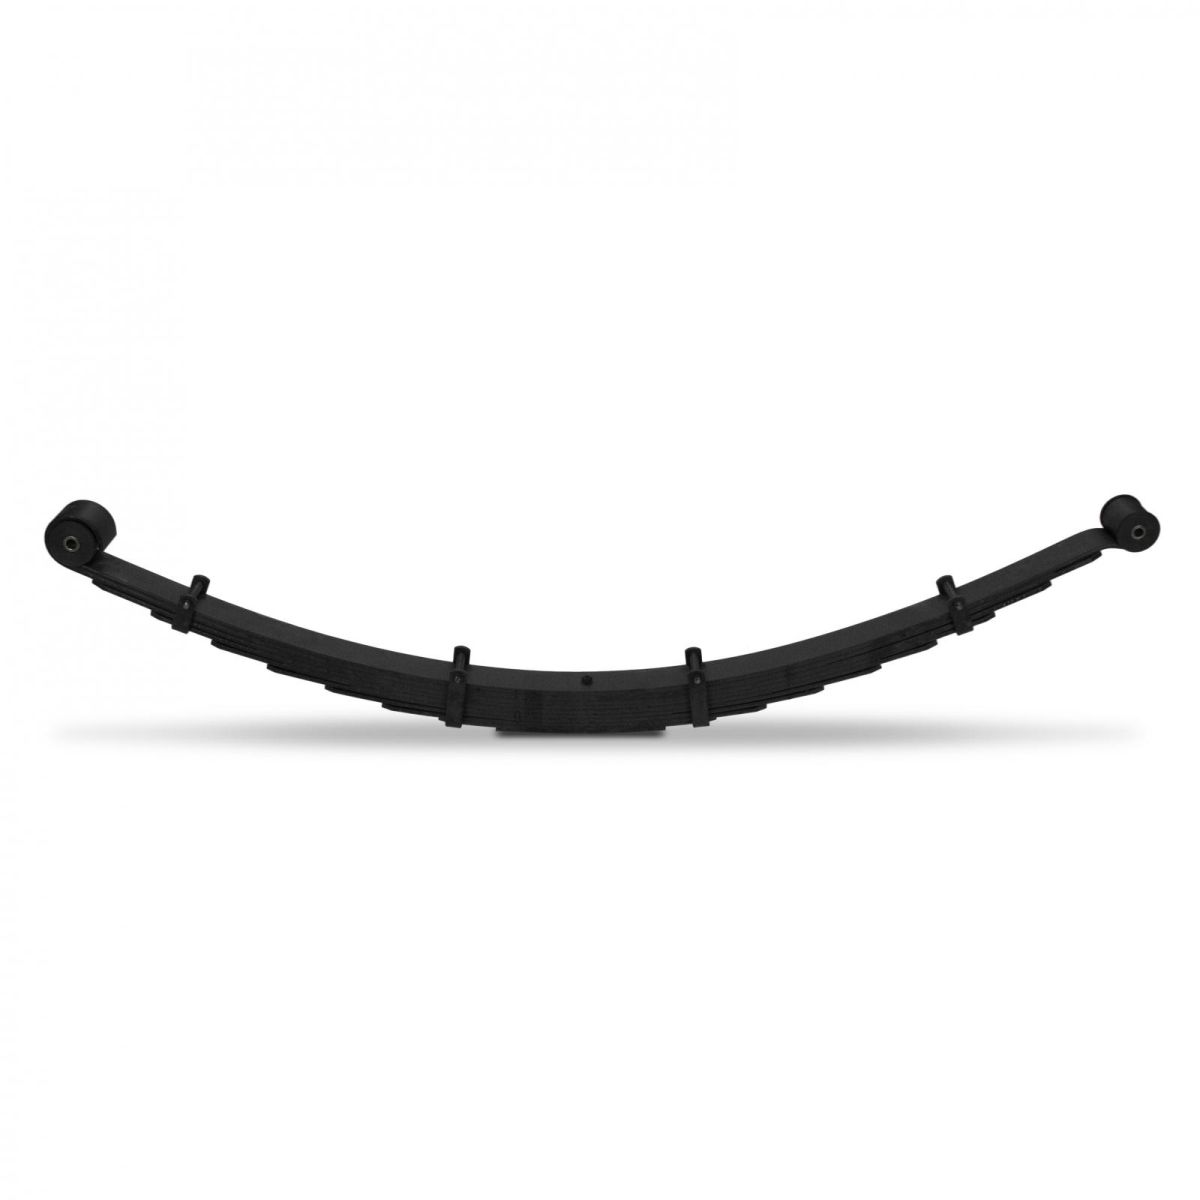 Cognito Motorsports Truck - Cognito Motorsports Truck Deaver 6 Inch Leaf Spring Pack M21 For 01-13 GM 2500 SUVS 210-90241